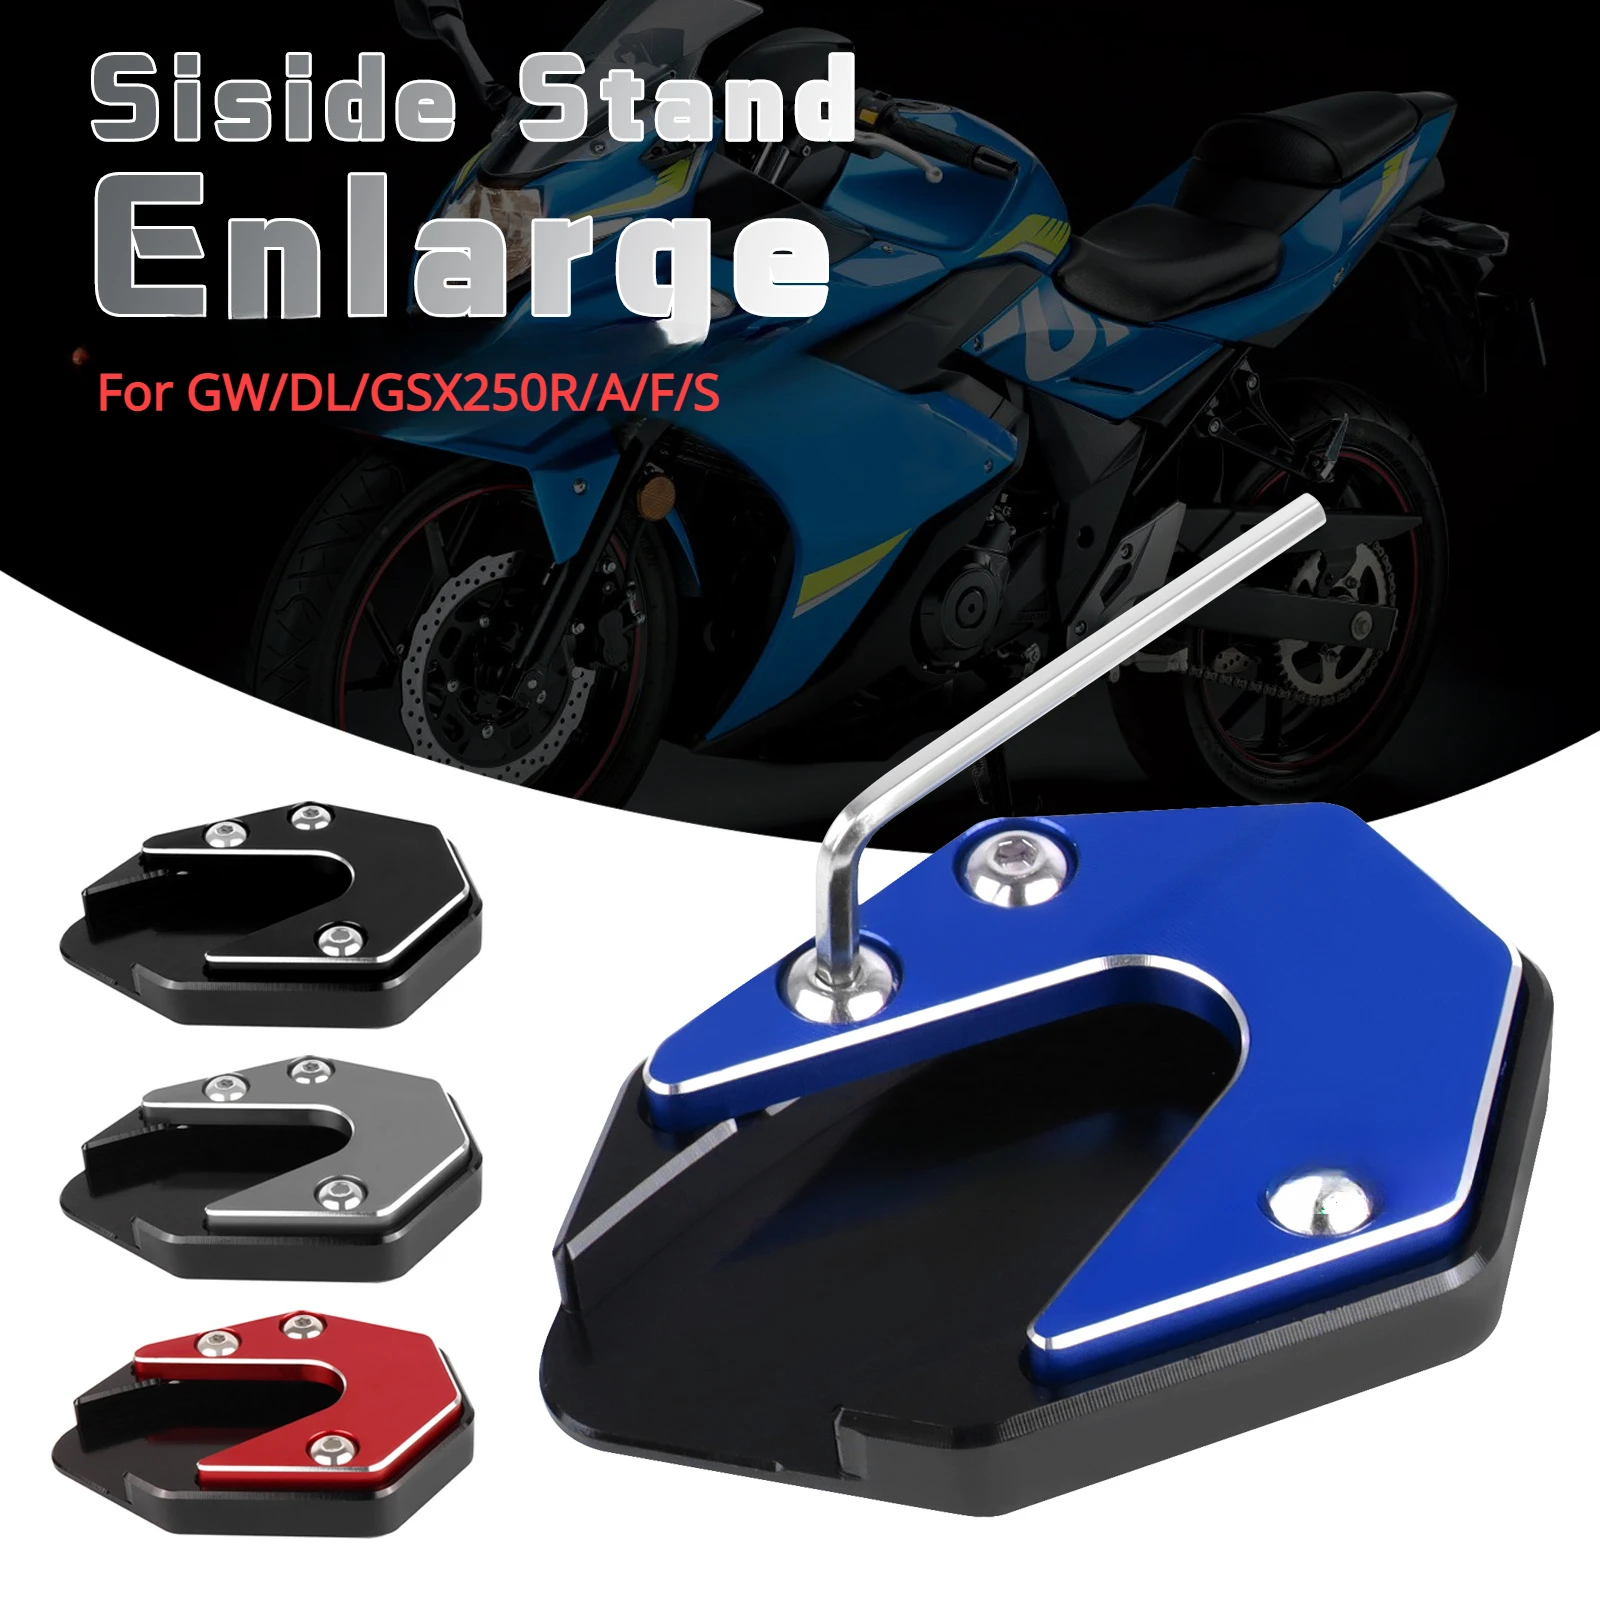 

For SUZUKI GW250 GSX250R GSX 250 R 2021-2022 DL250 Motorcycle Kickstand Extension Plate Foot Side Stand Support Pad